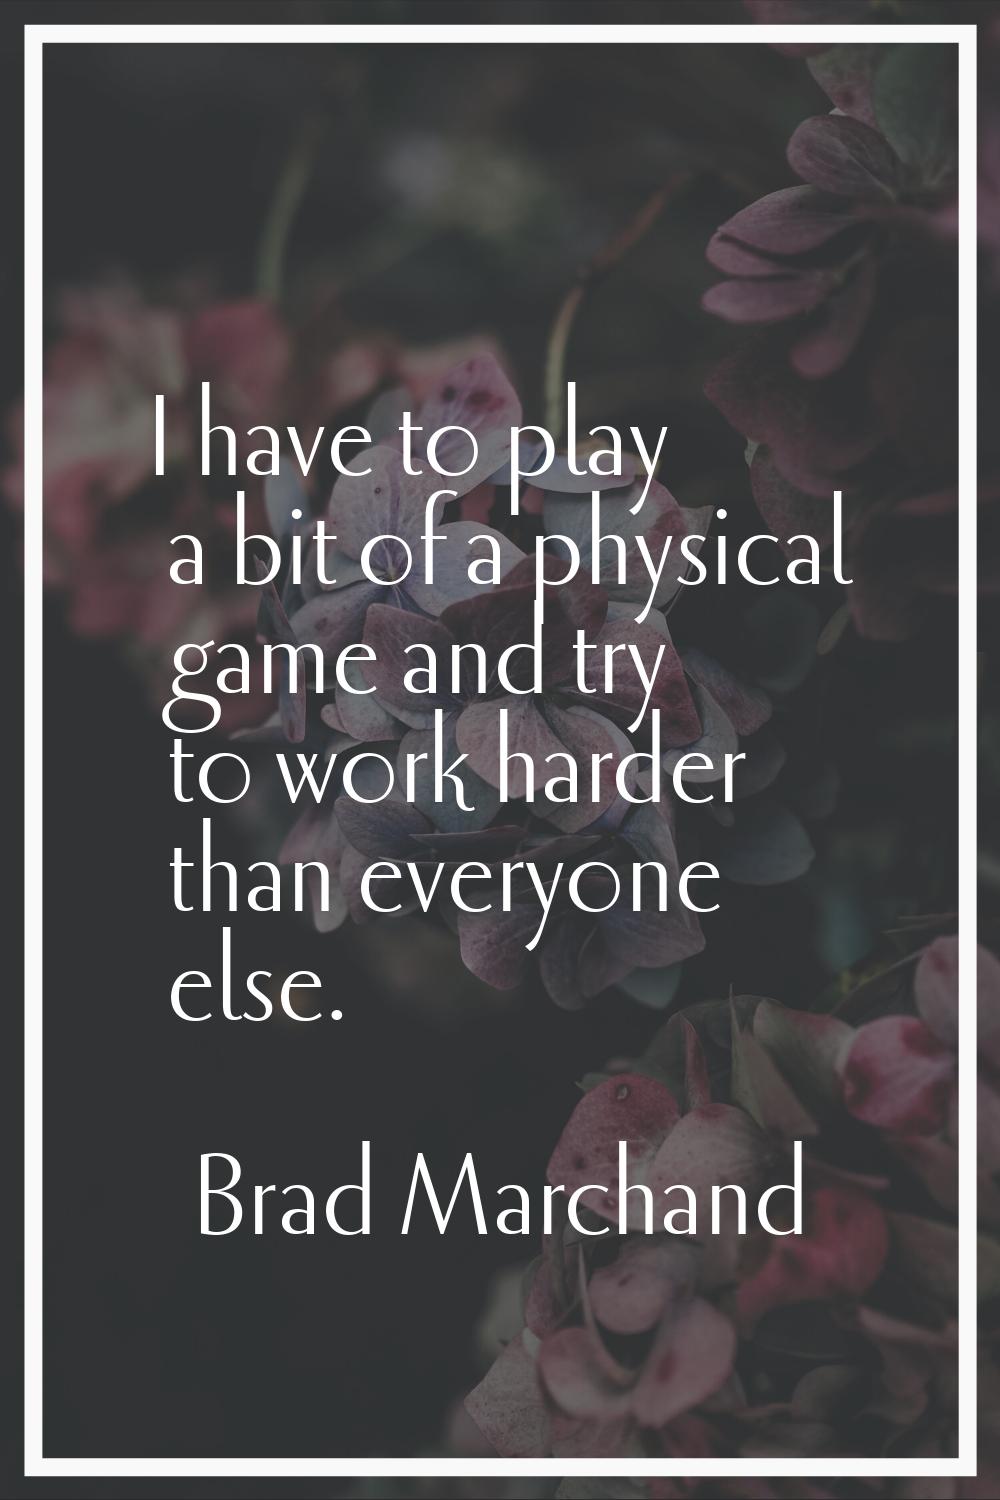 I have to play a bit of a physical game and try to work harder than everyone else.